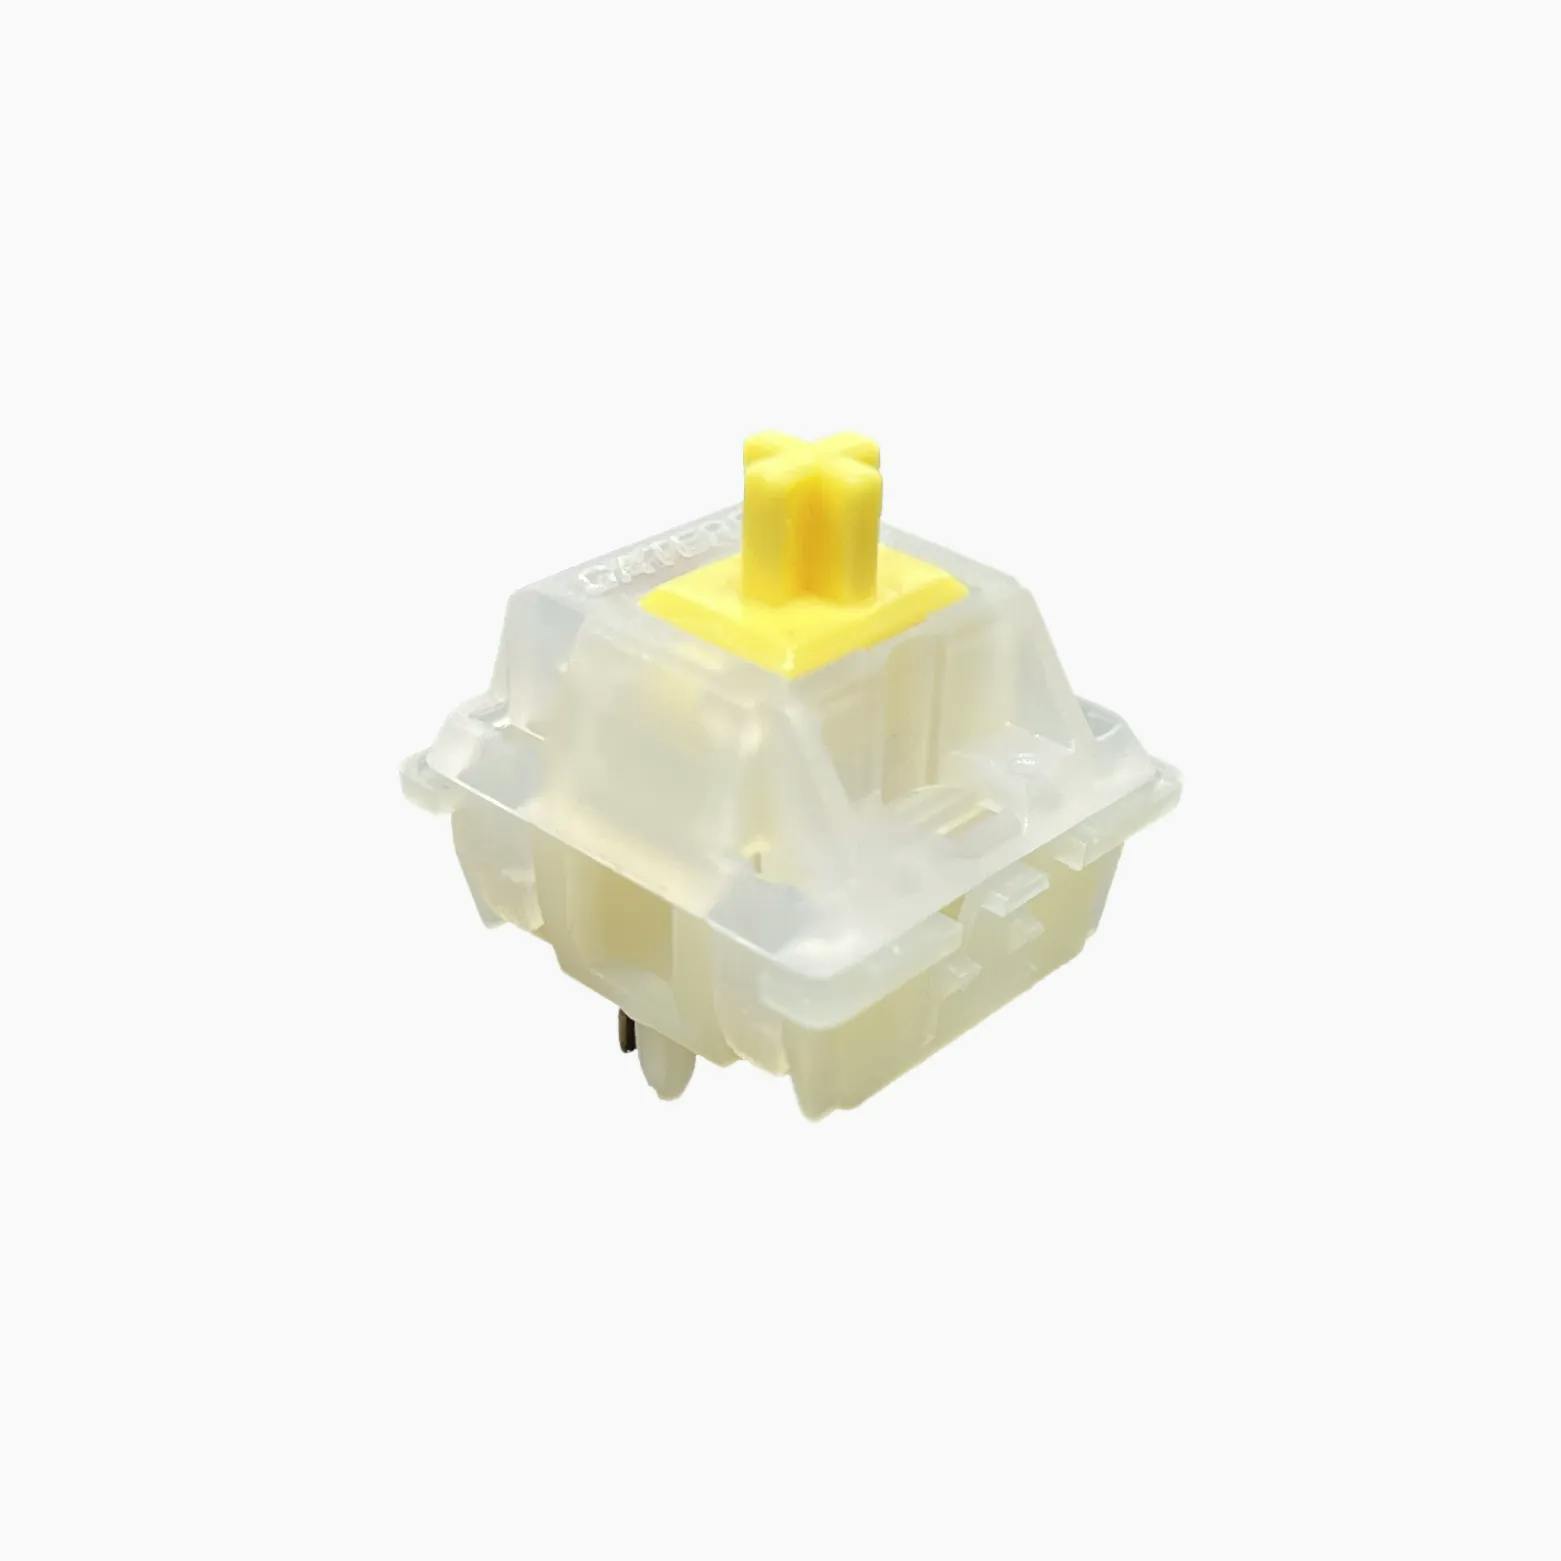 Image for Gateron Pro Milky Yellow 1.0 Linear Switch